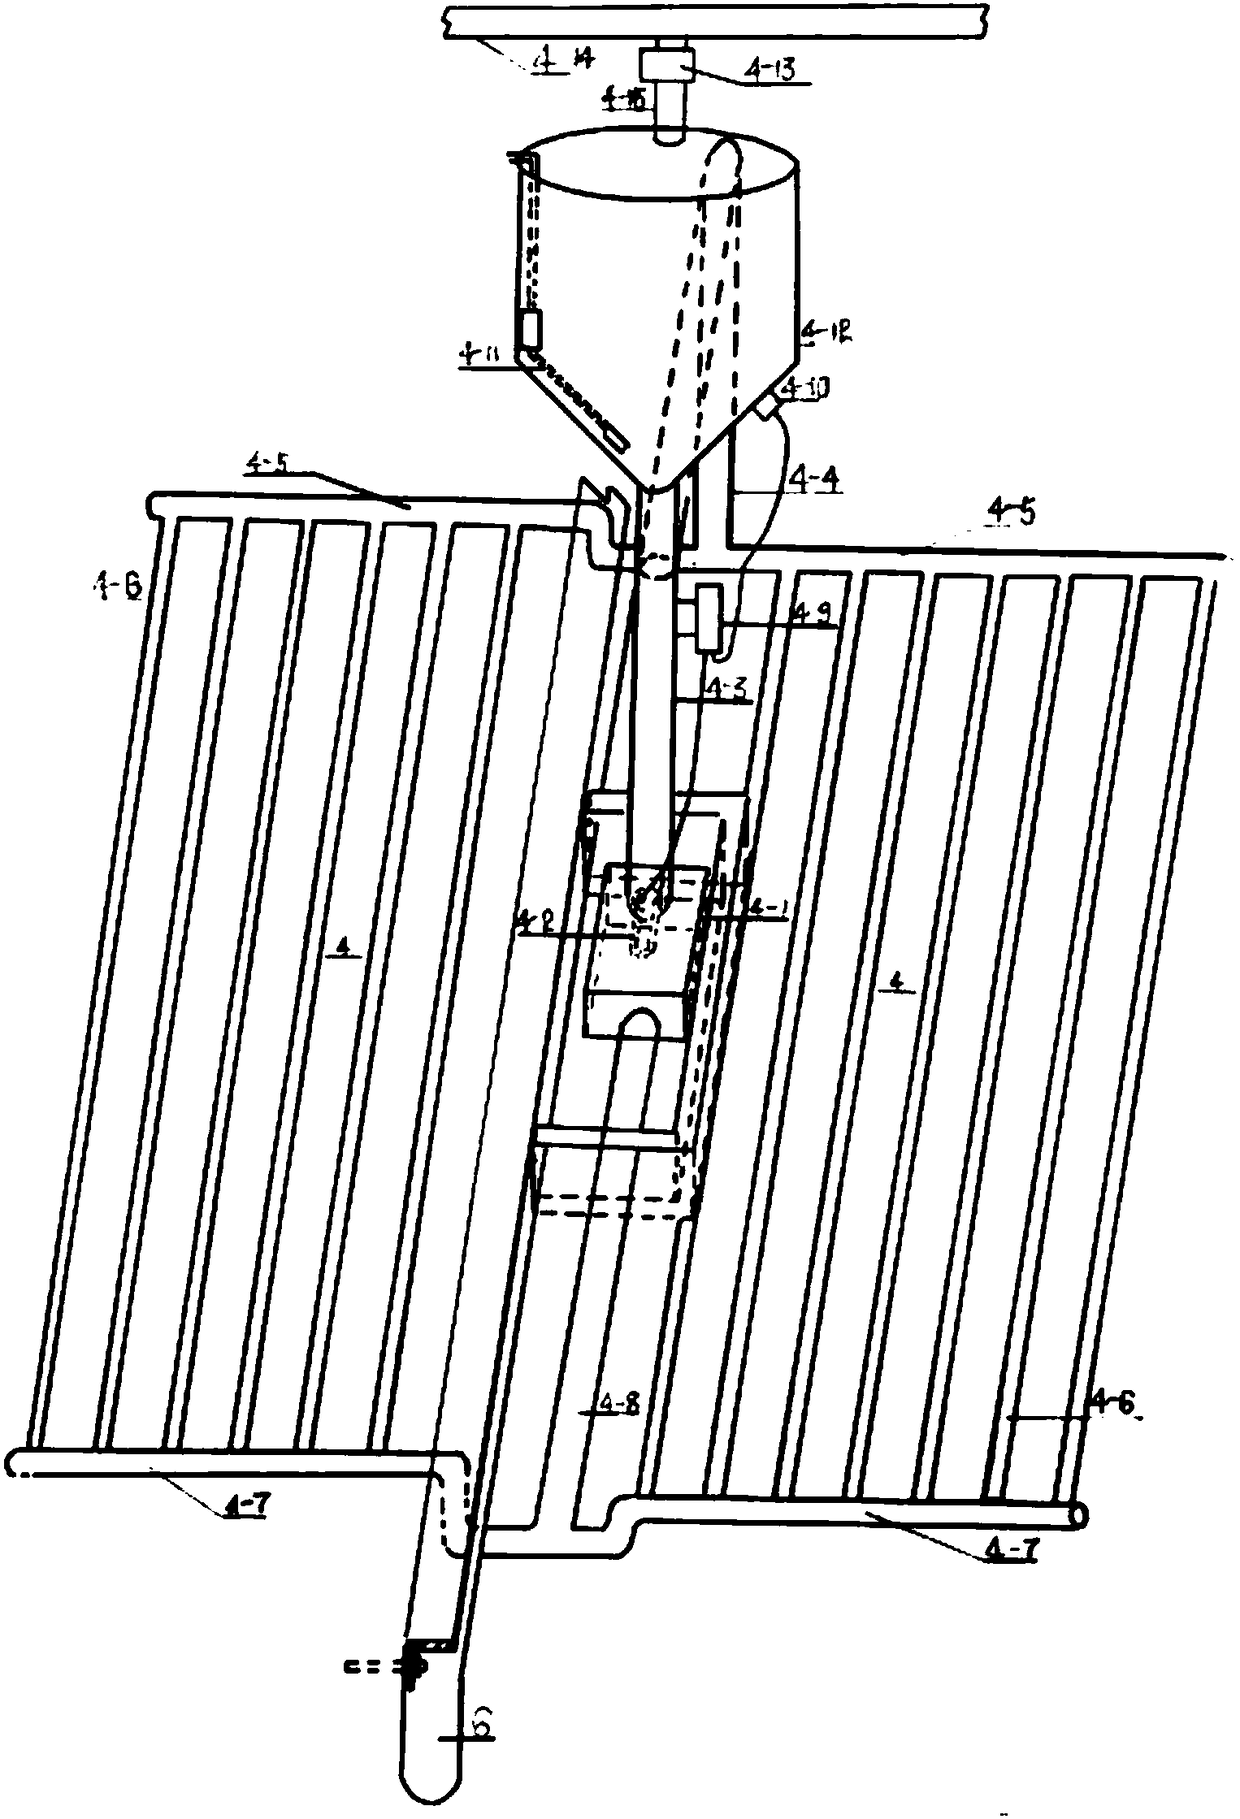 Pen-in-pen based pig breeding device and method